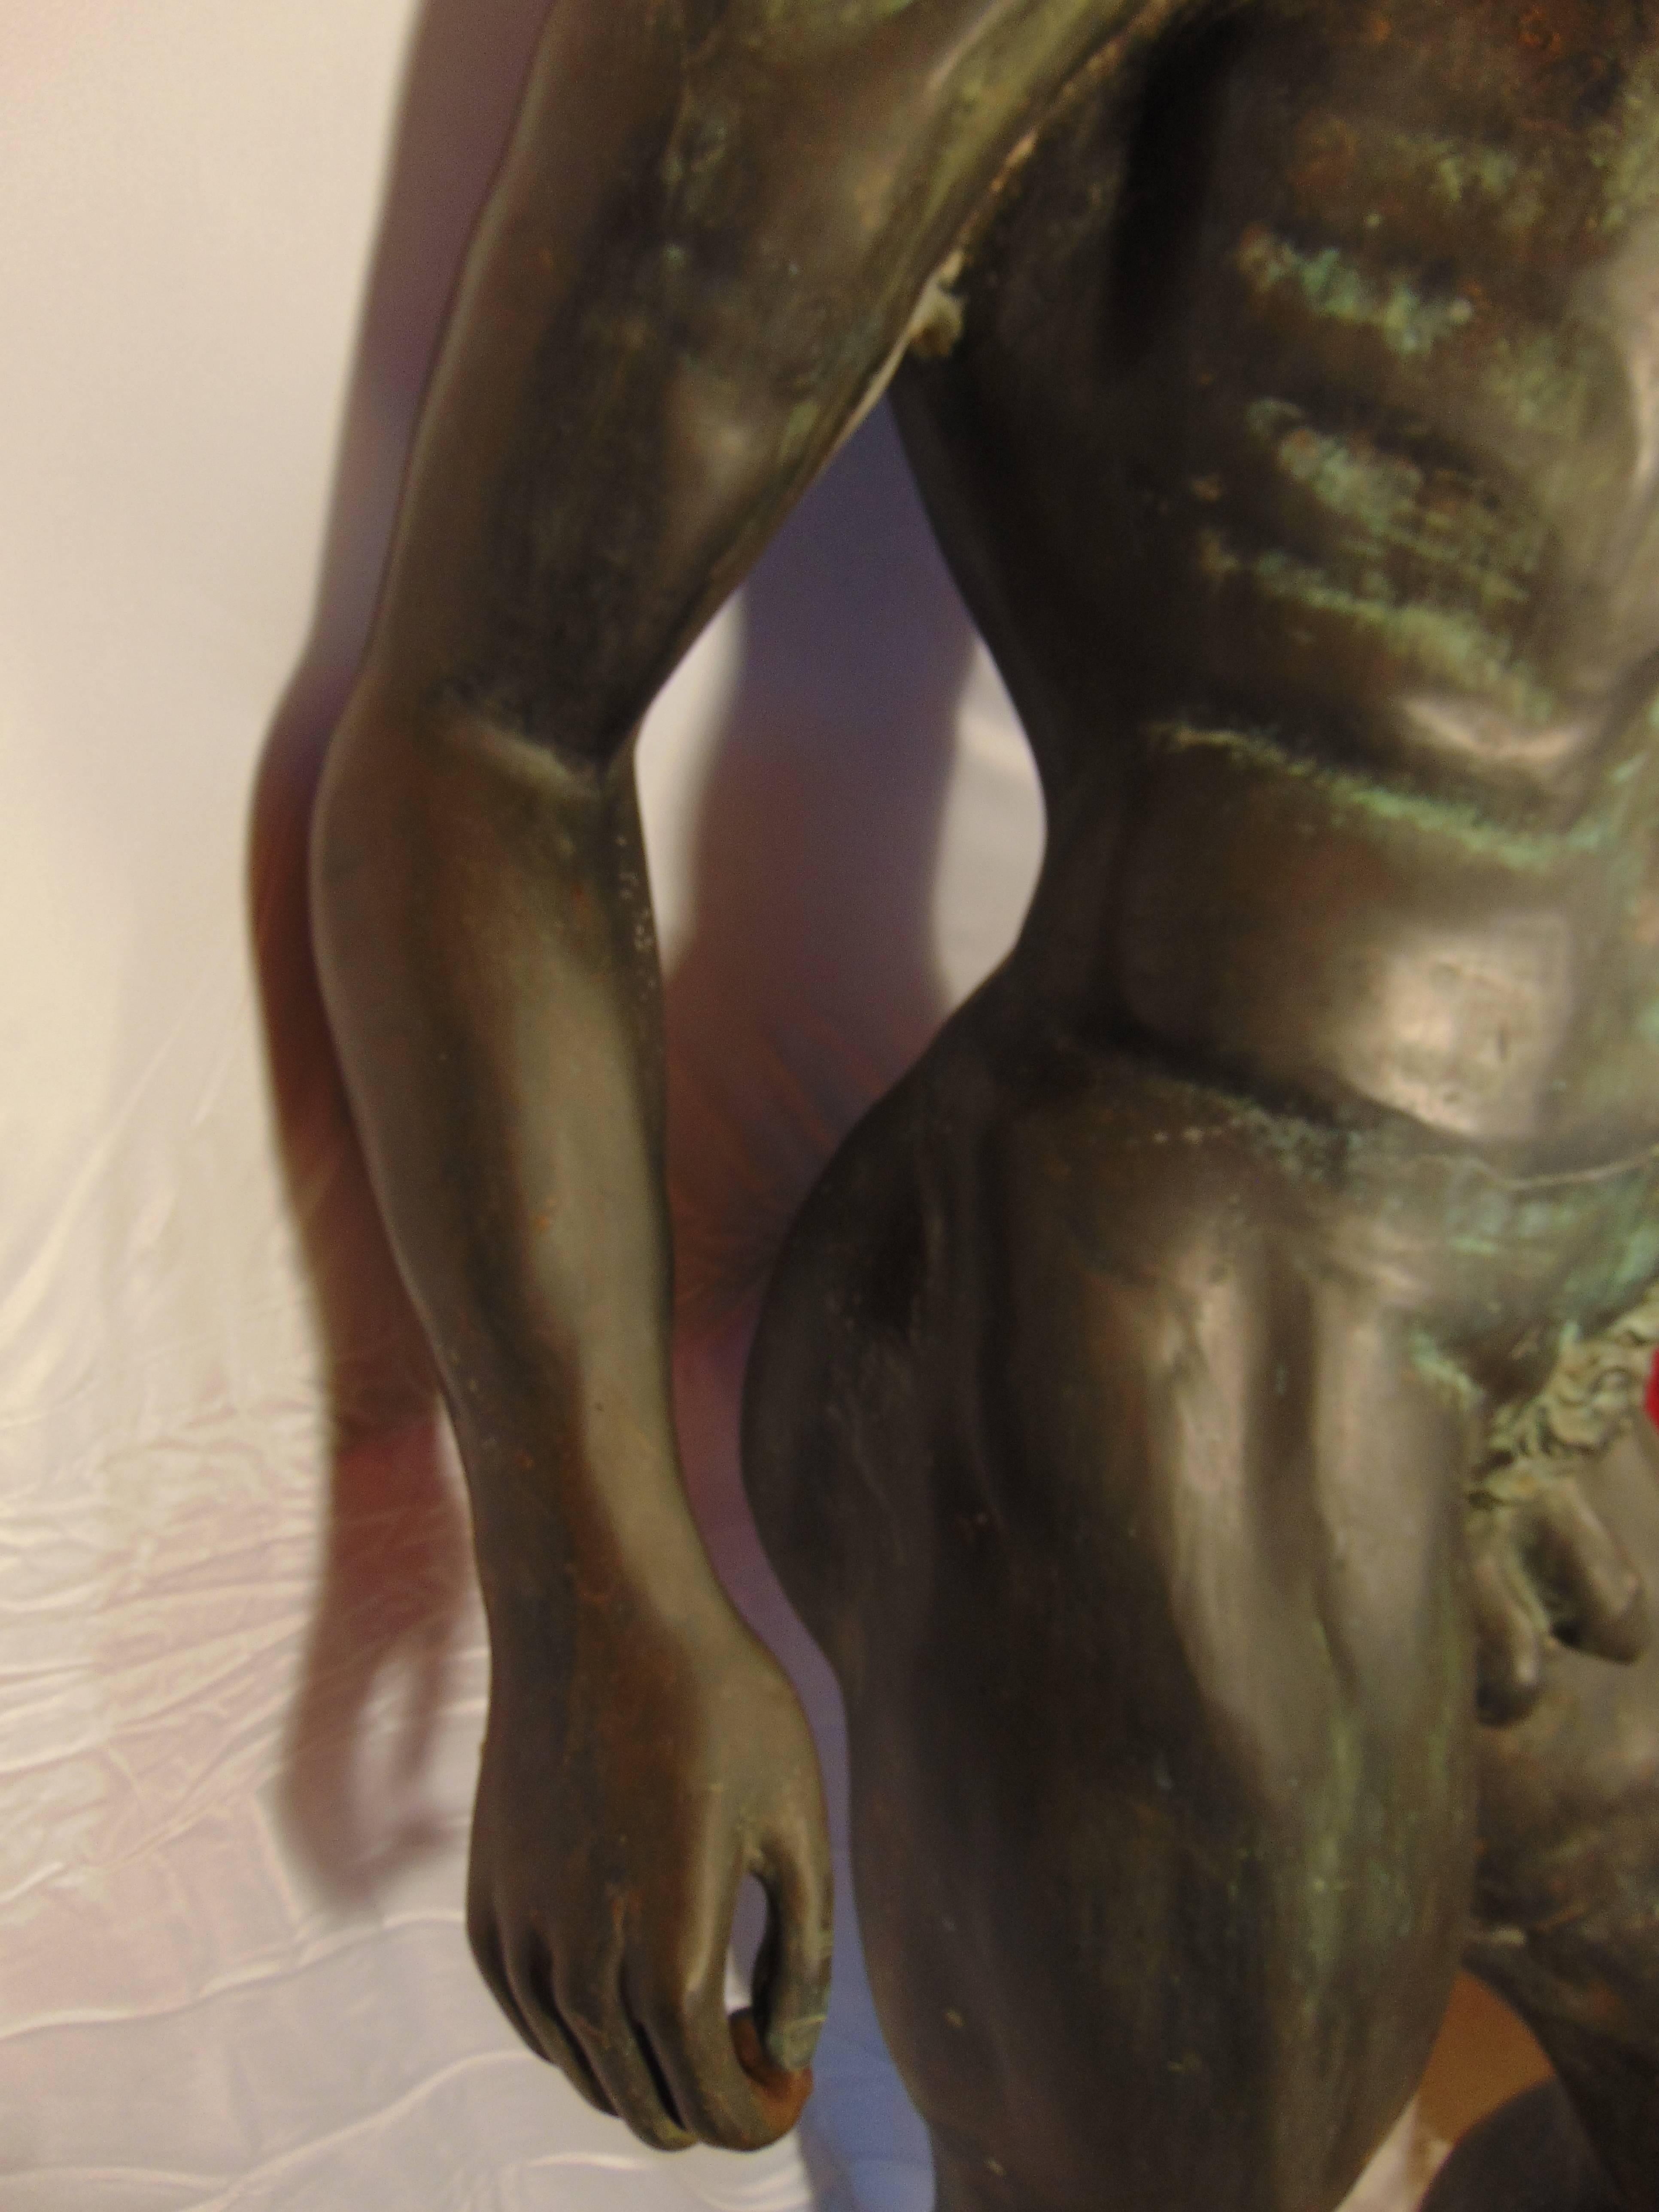 Classical Greek life-sized reproduction of one of The Riace bronzes